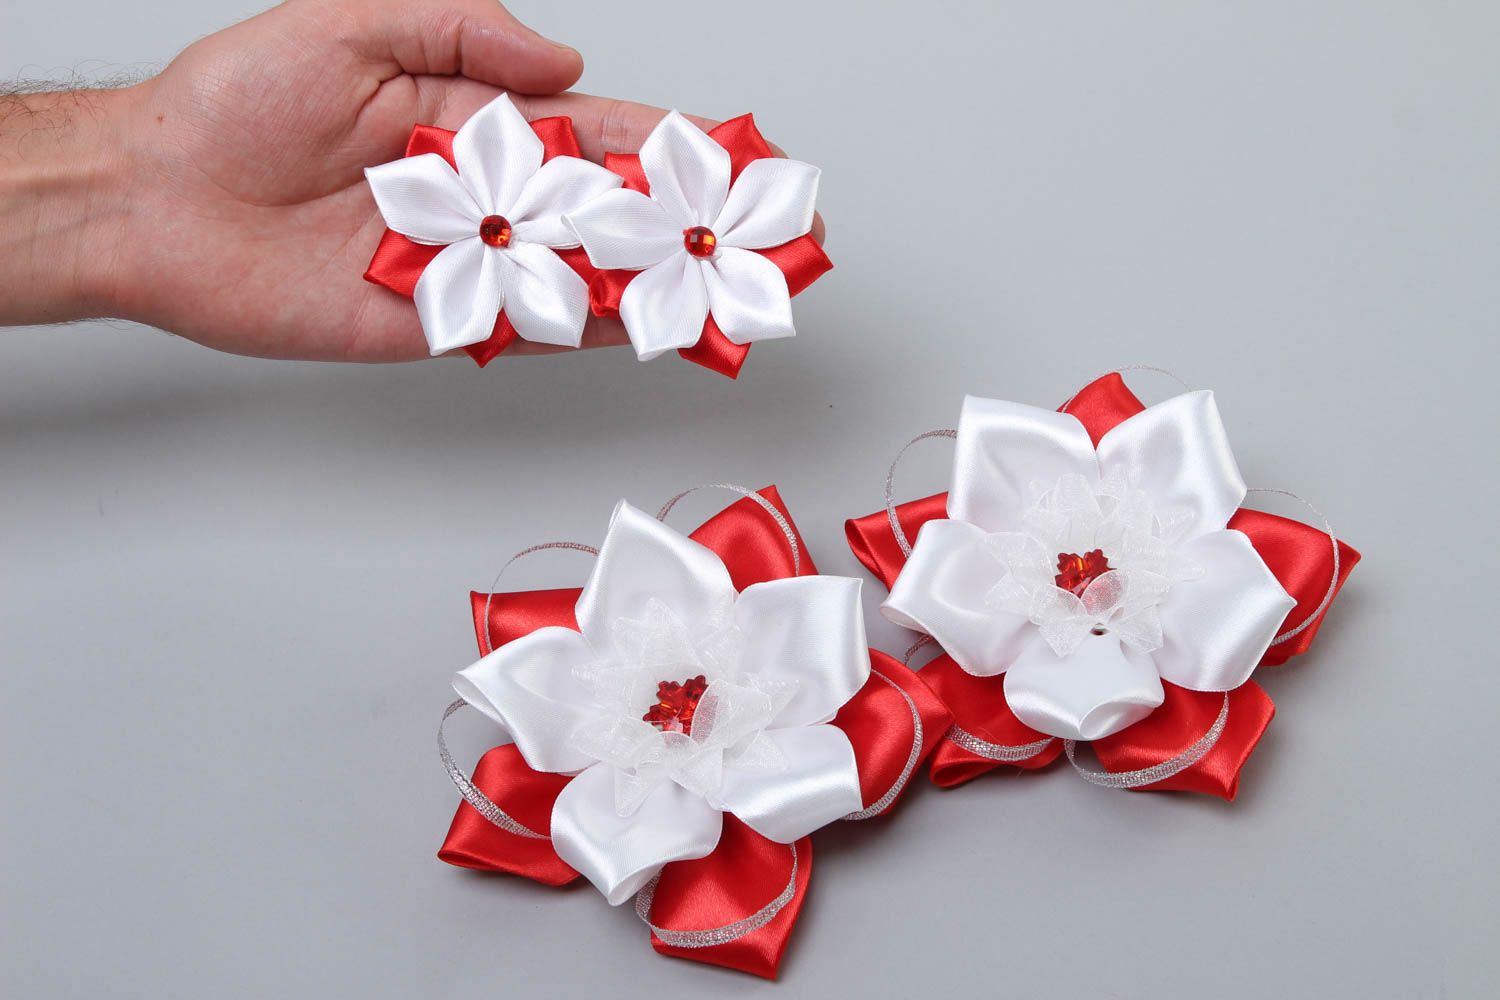 Flower hair clips designer hair accessory gift ideas unusual gift set of 4 items photo 5